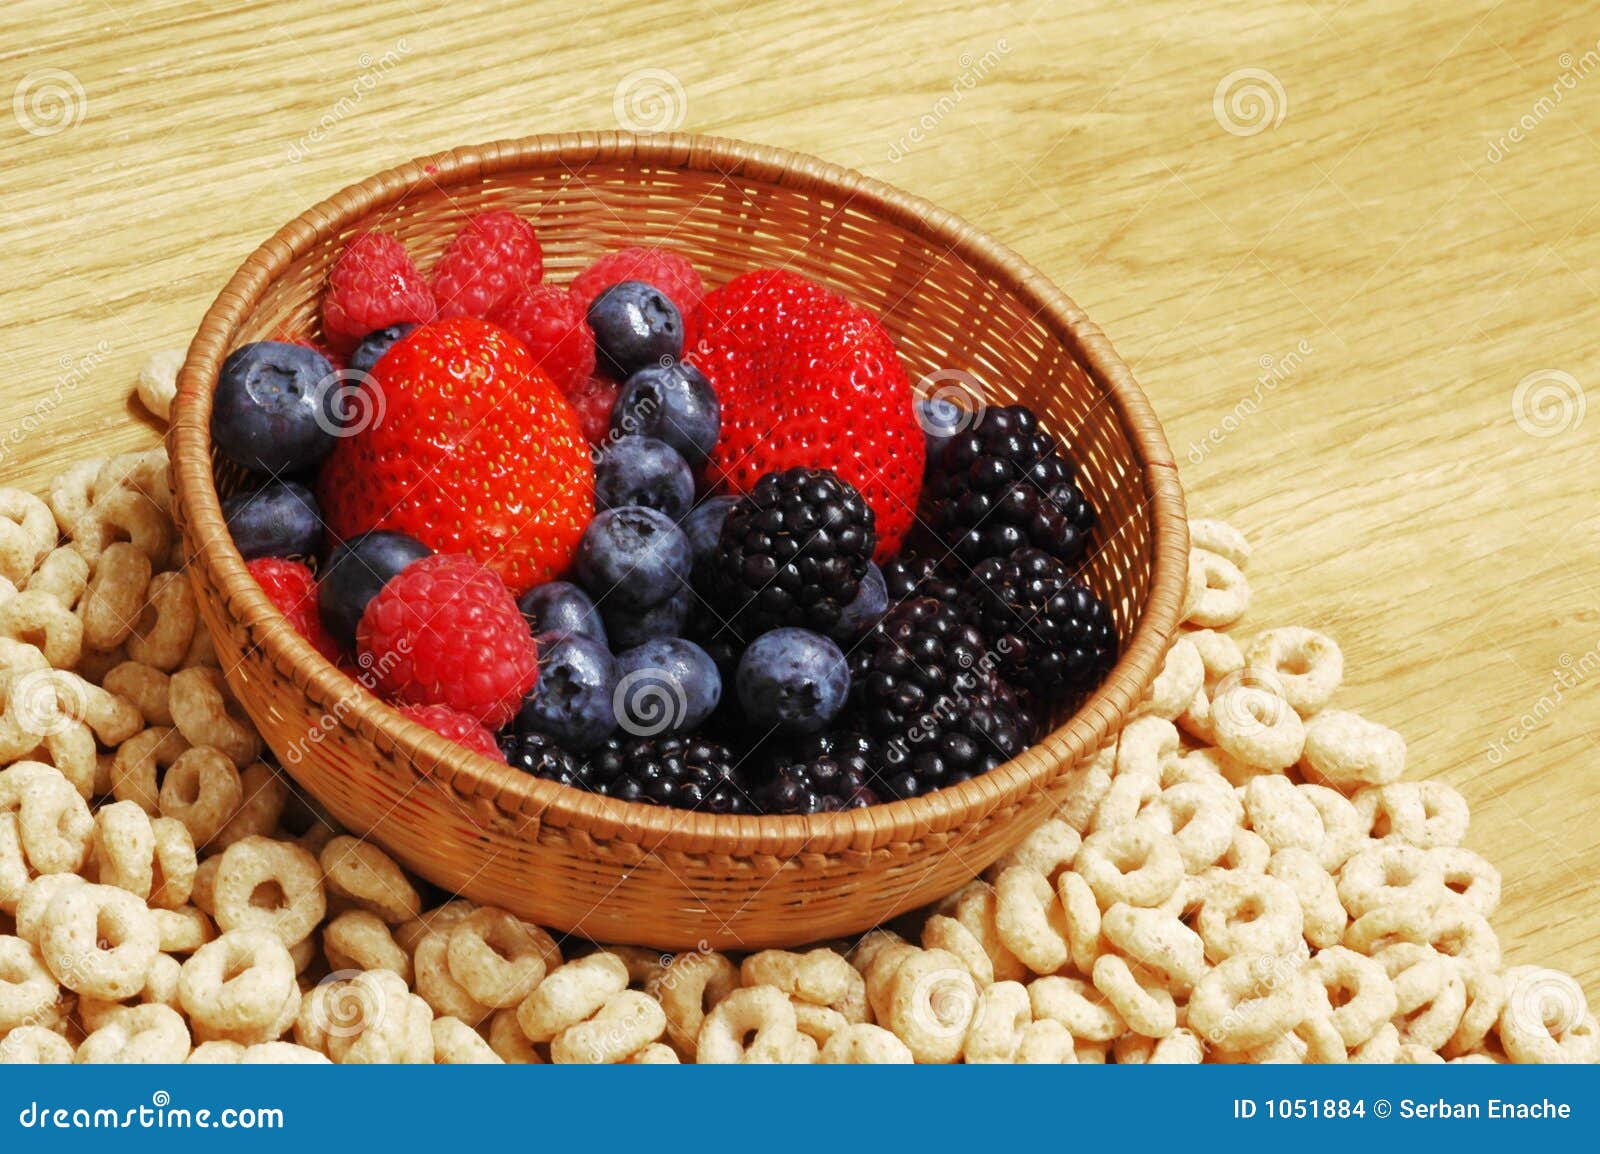 fruits and cereals